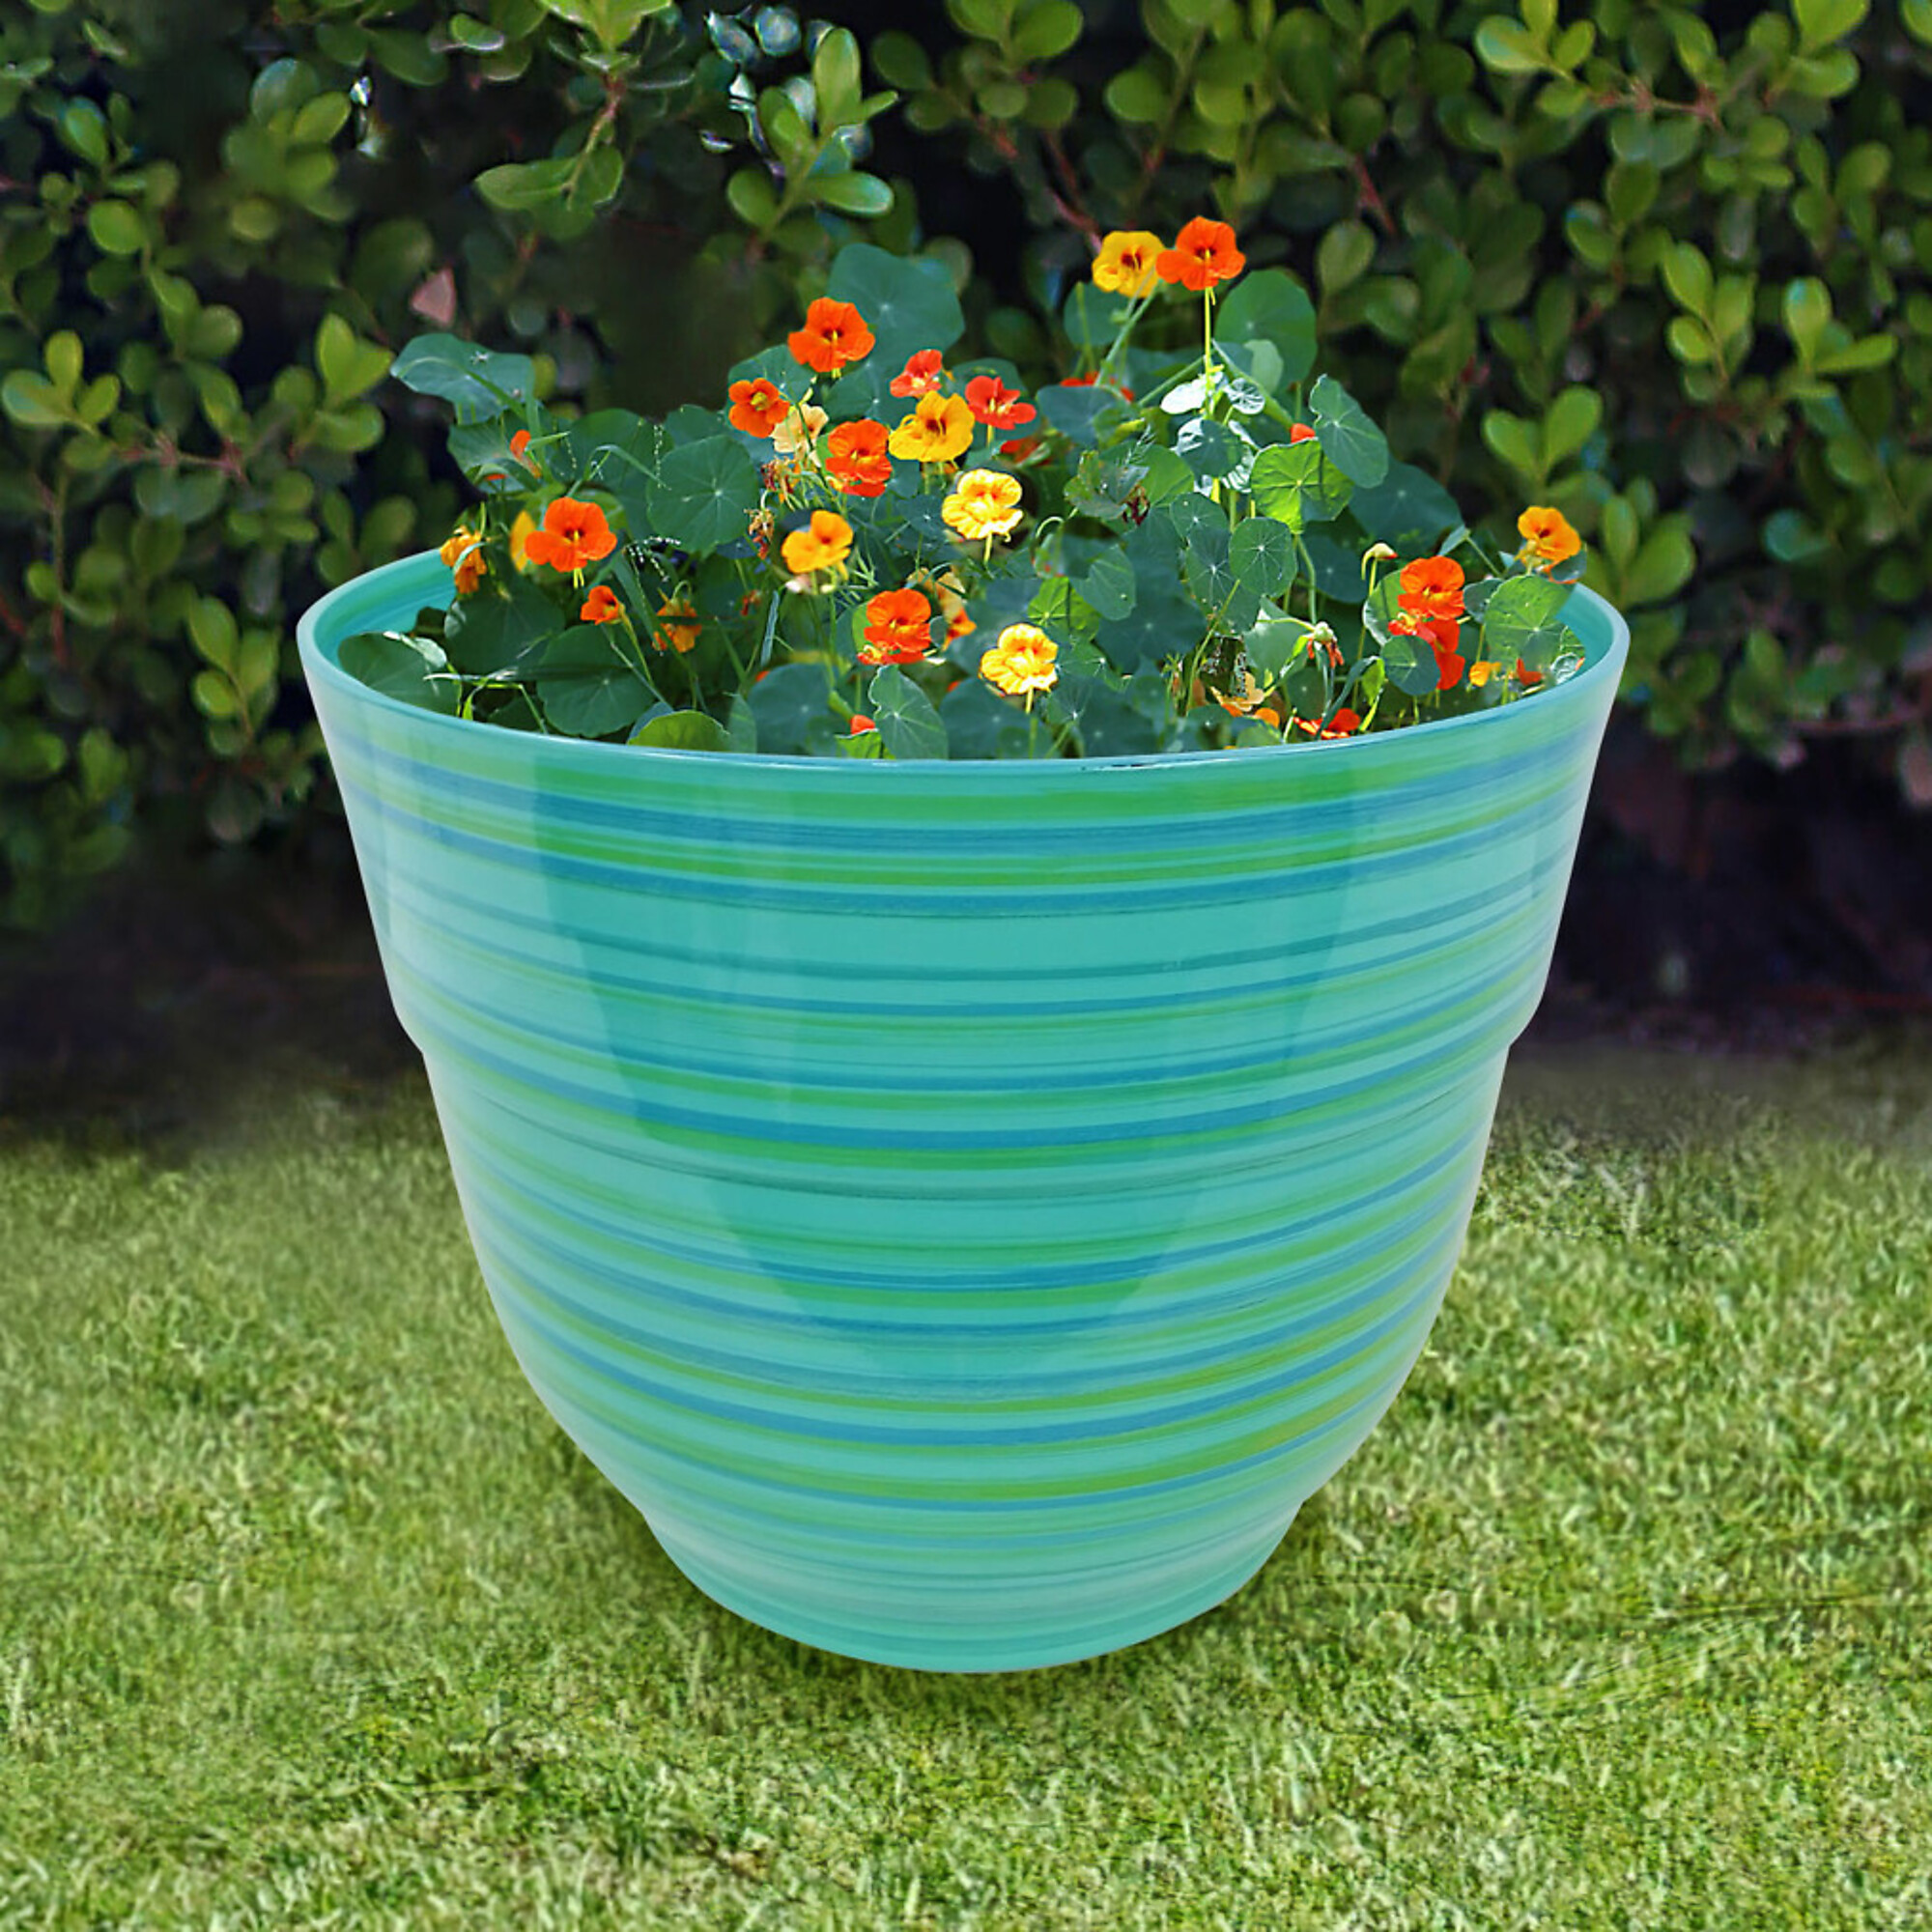 Alpine Corporation, Turquoise Glossy Striped Planter w/ Drainage Hole, Container Length 13 in, Container Width 13 in, Material Polypropylene, Model